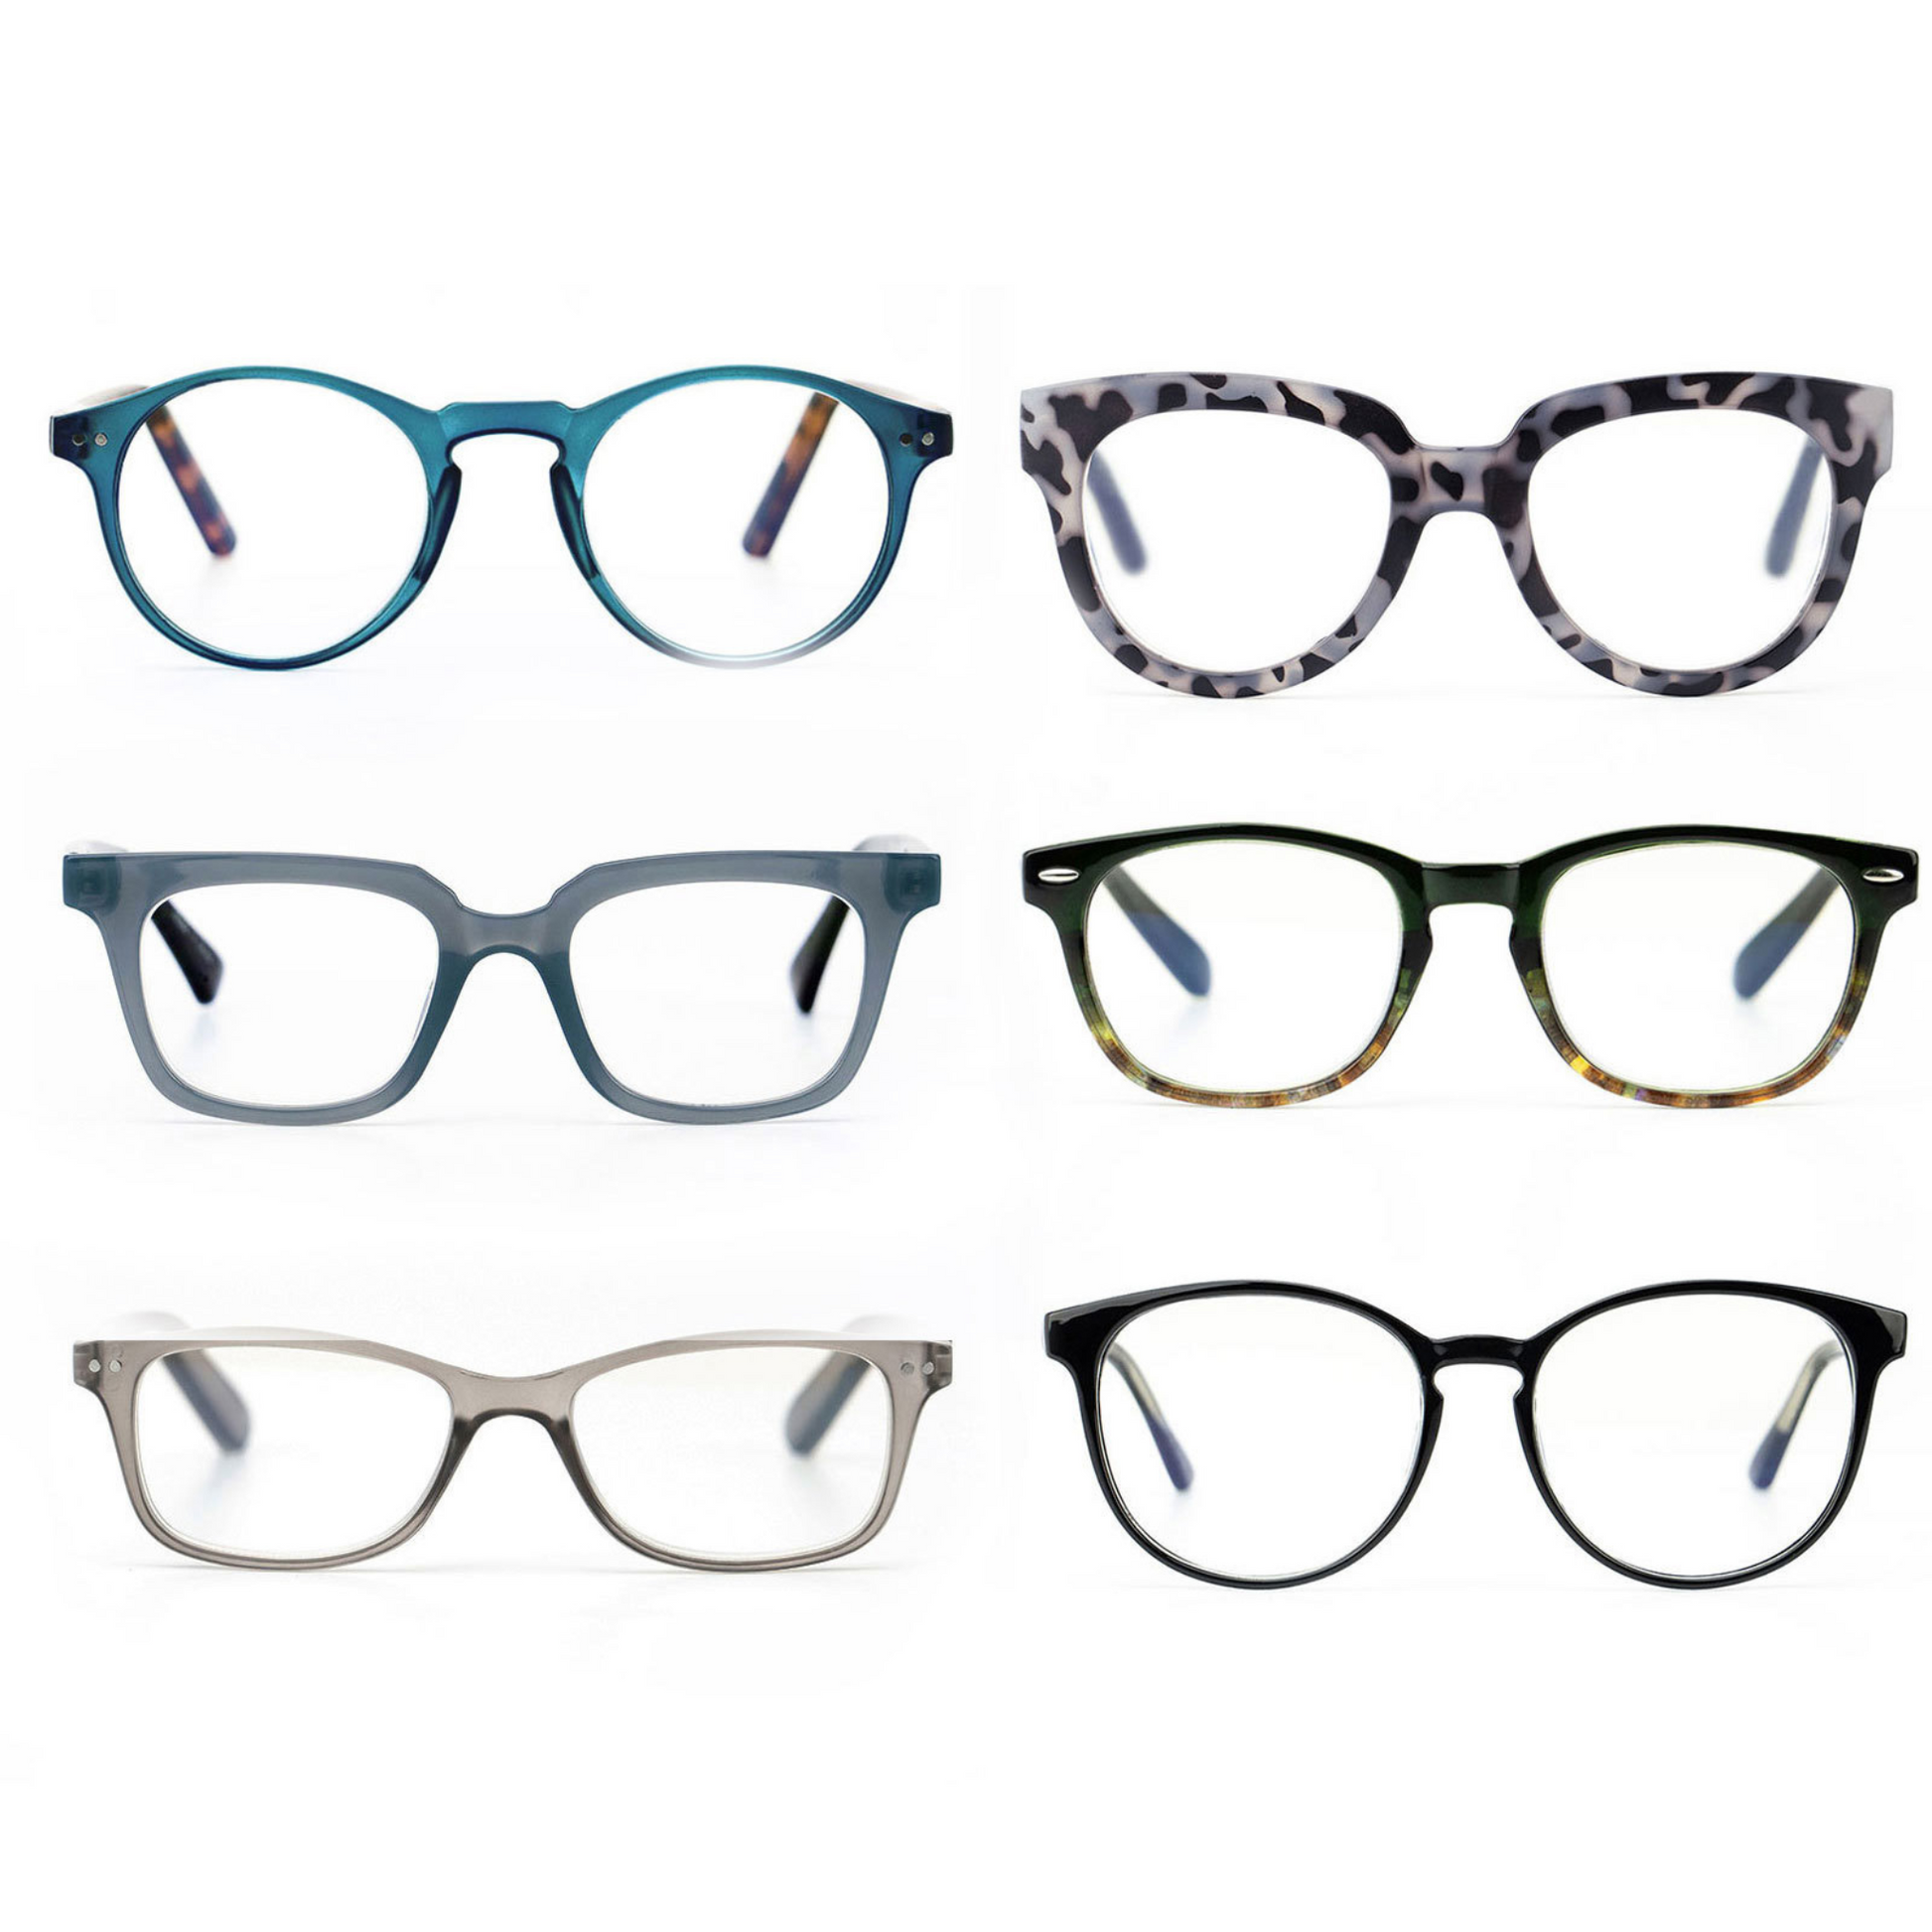 Optimum Optical reading glasses. Available in a variety of colors and styles